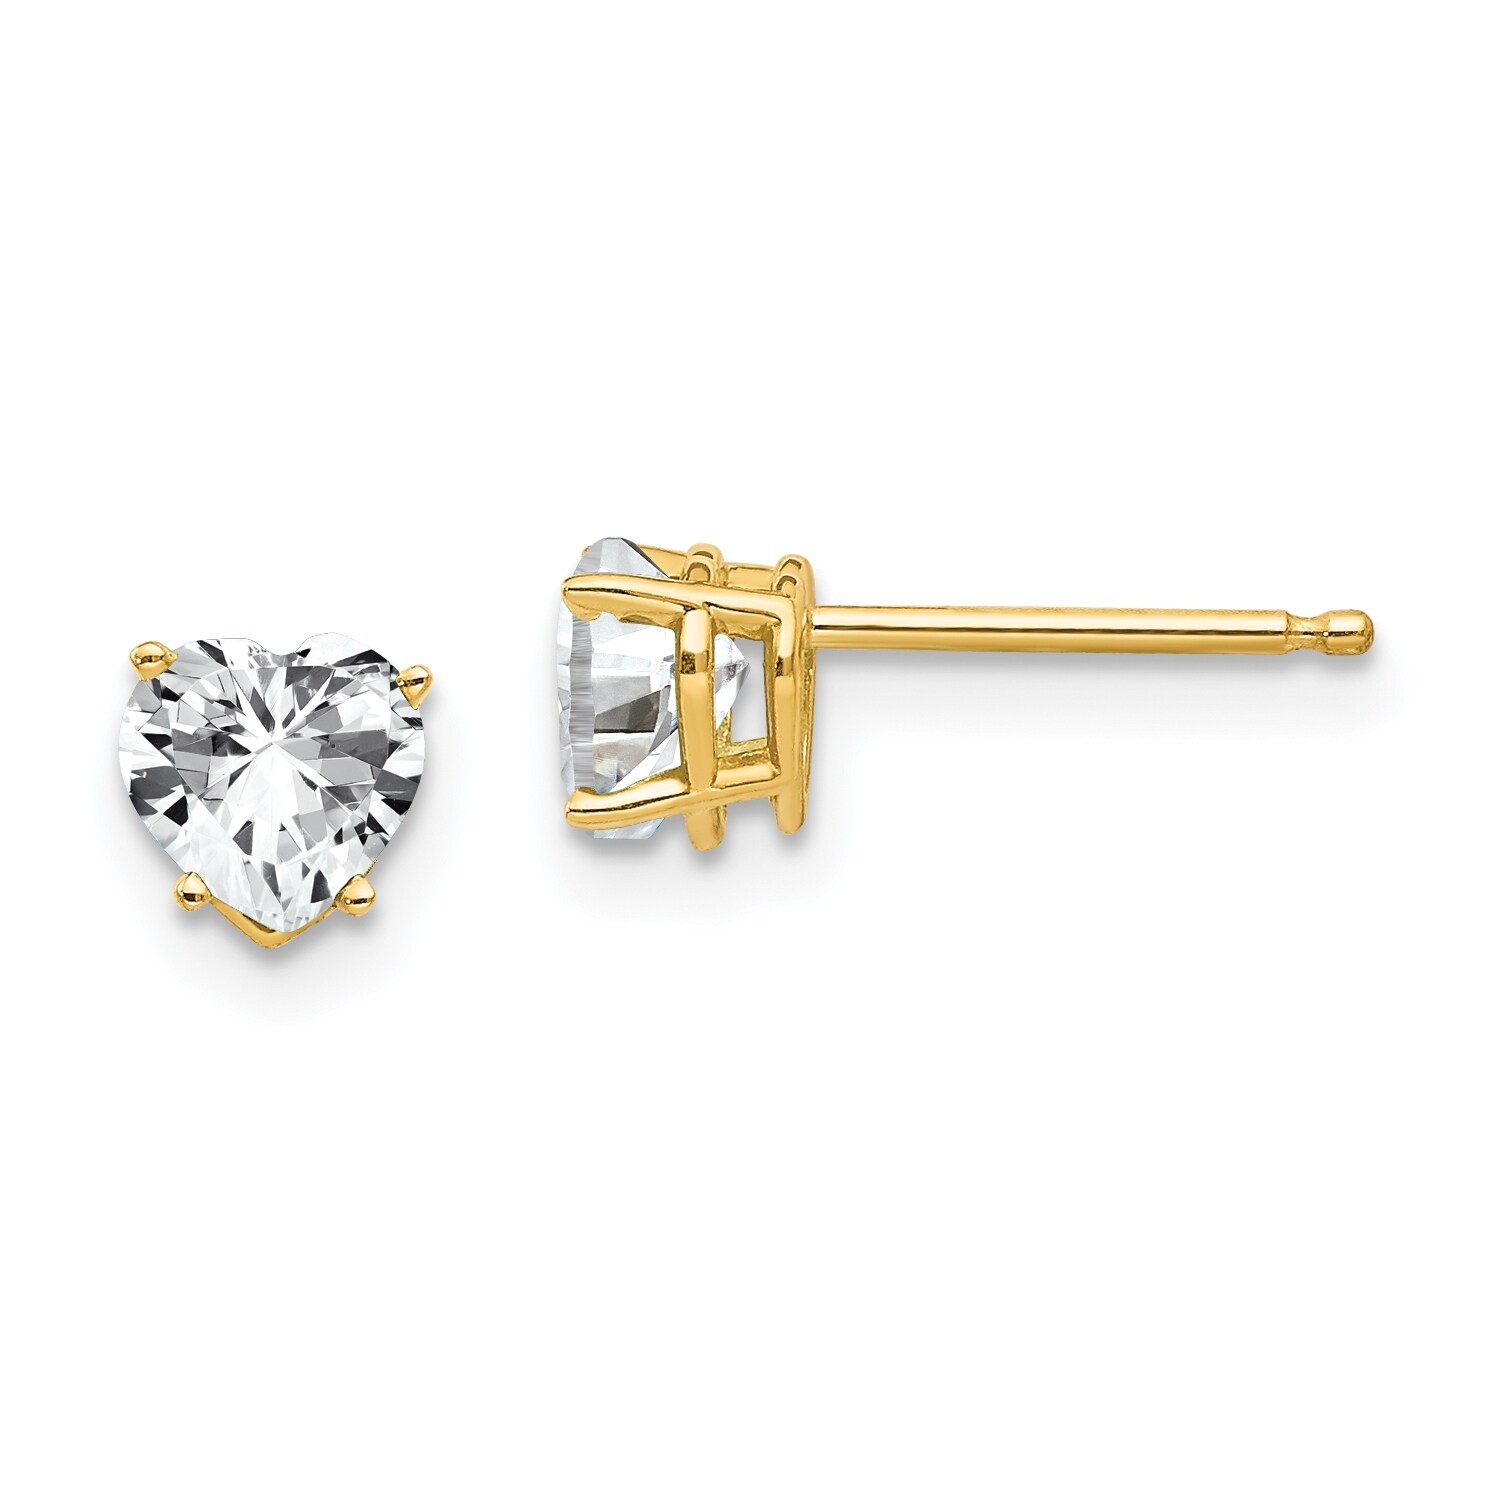 14K Yellow Gold High Polished Micropave Heart Cubic Zirconia Stud Earring 